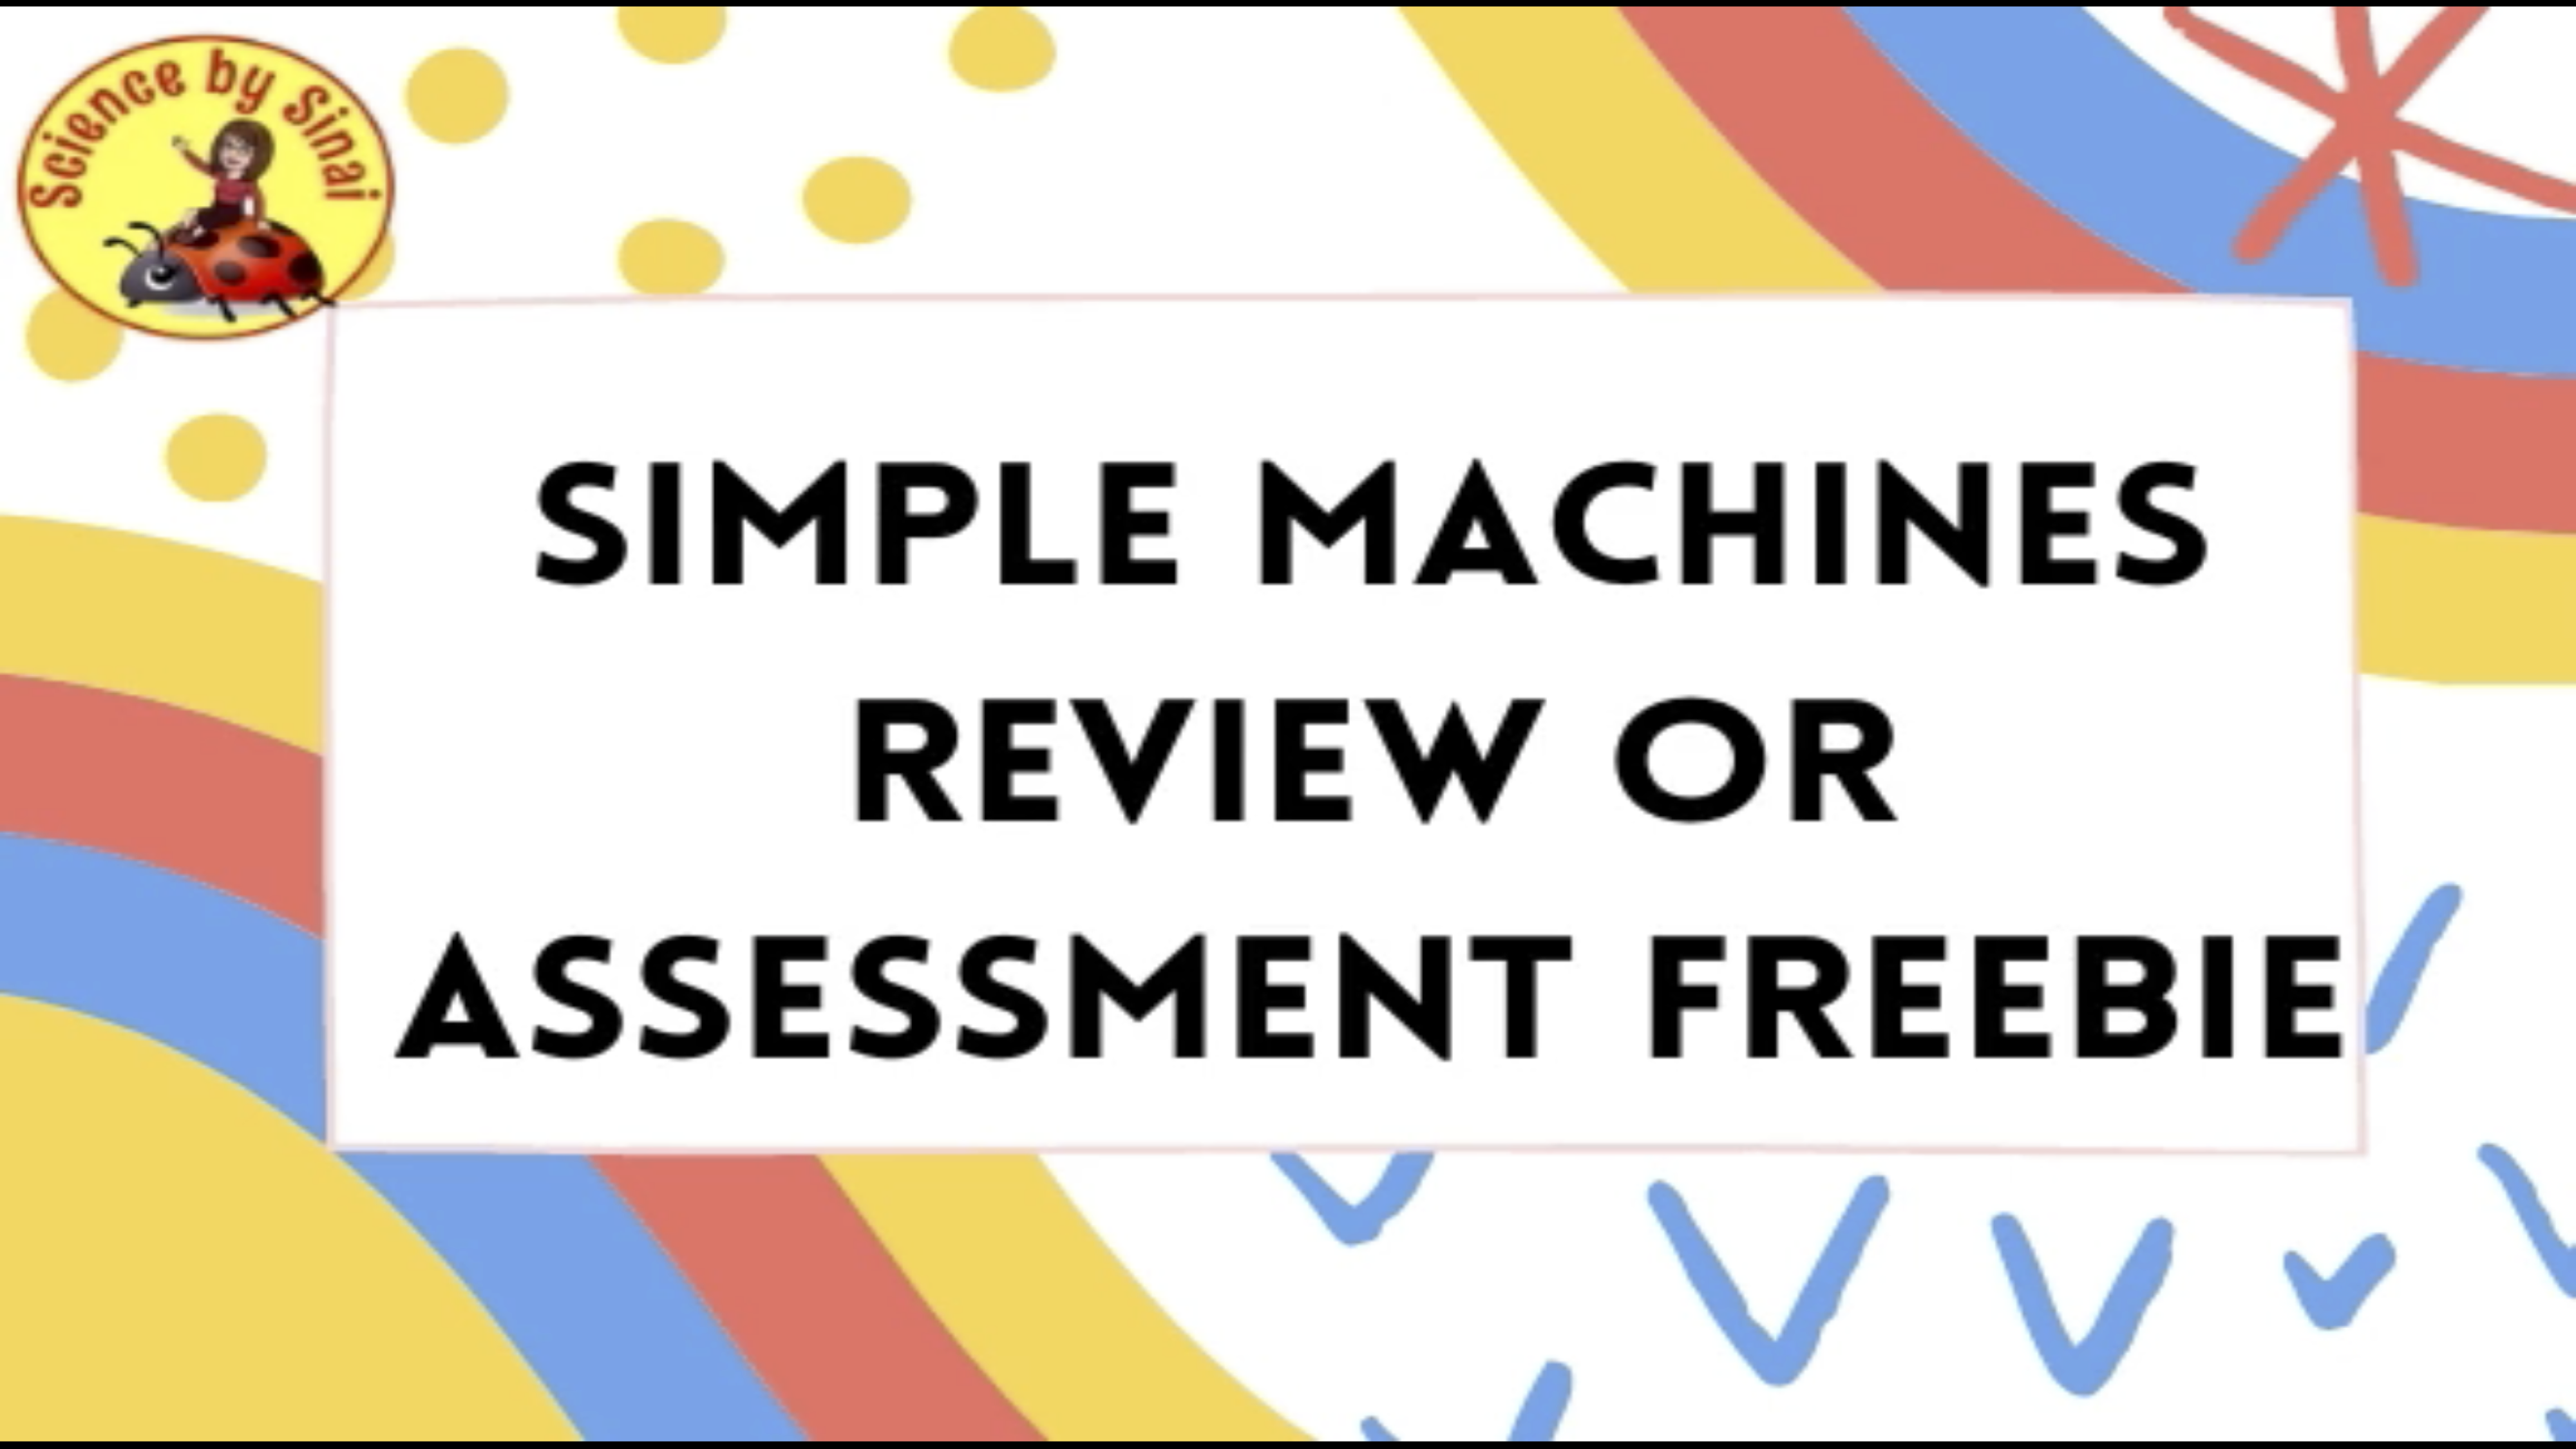 Freebie: Simple Machines Review or assessment